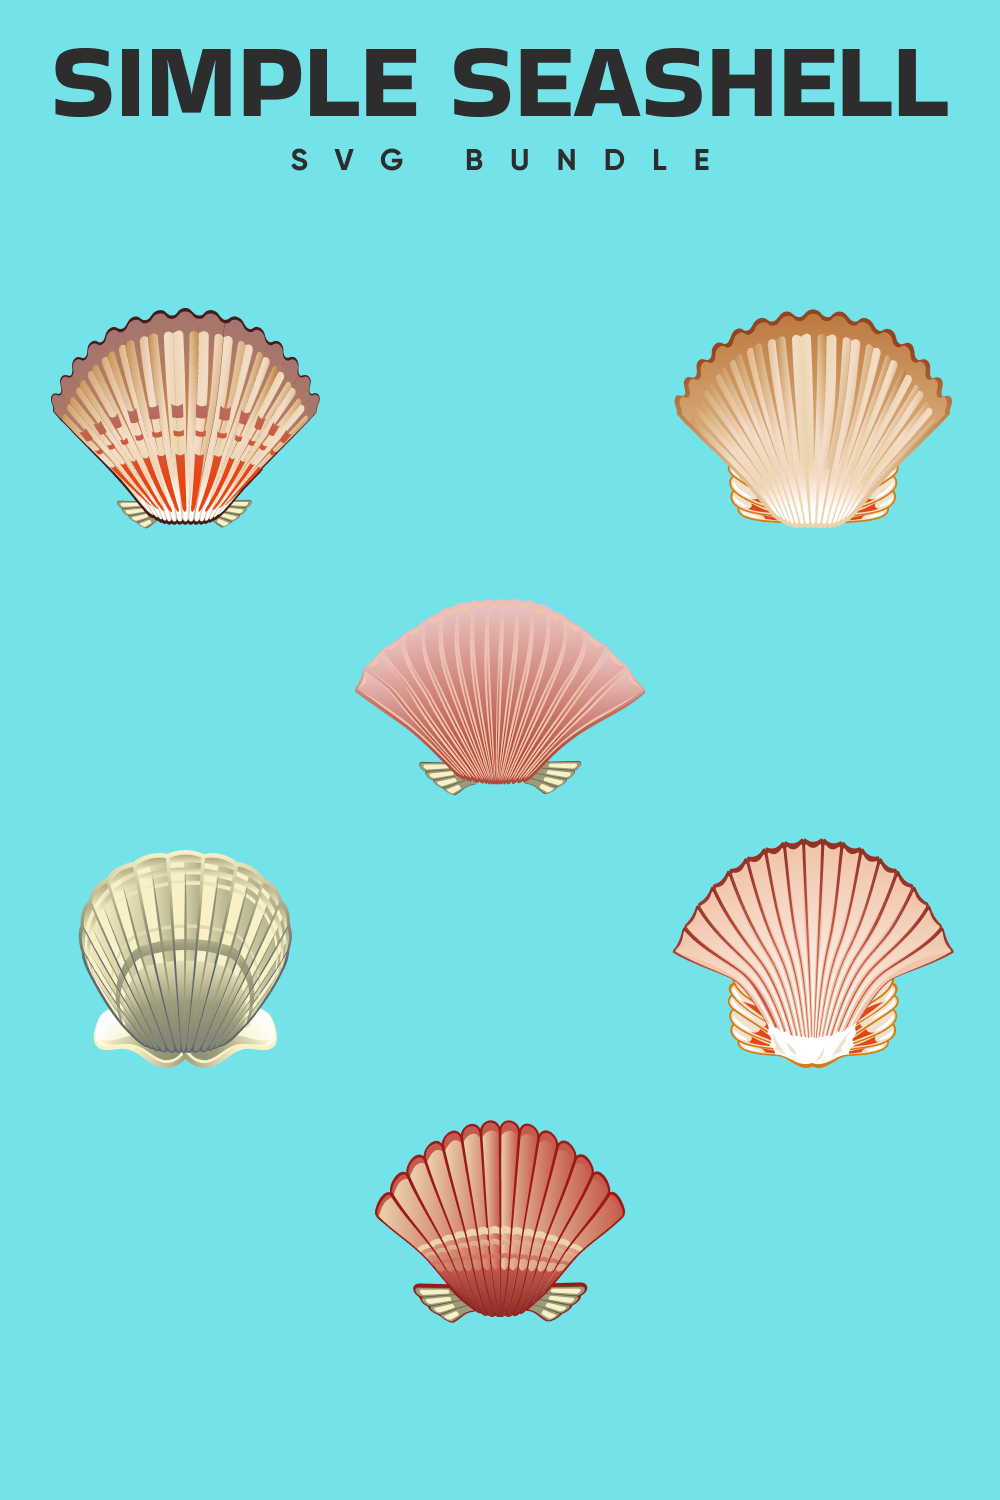 Group of seashells on a blue background.